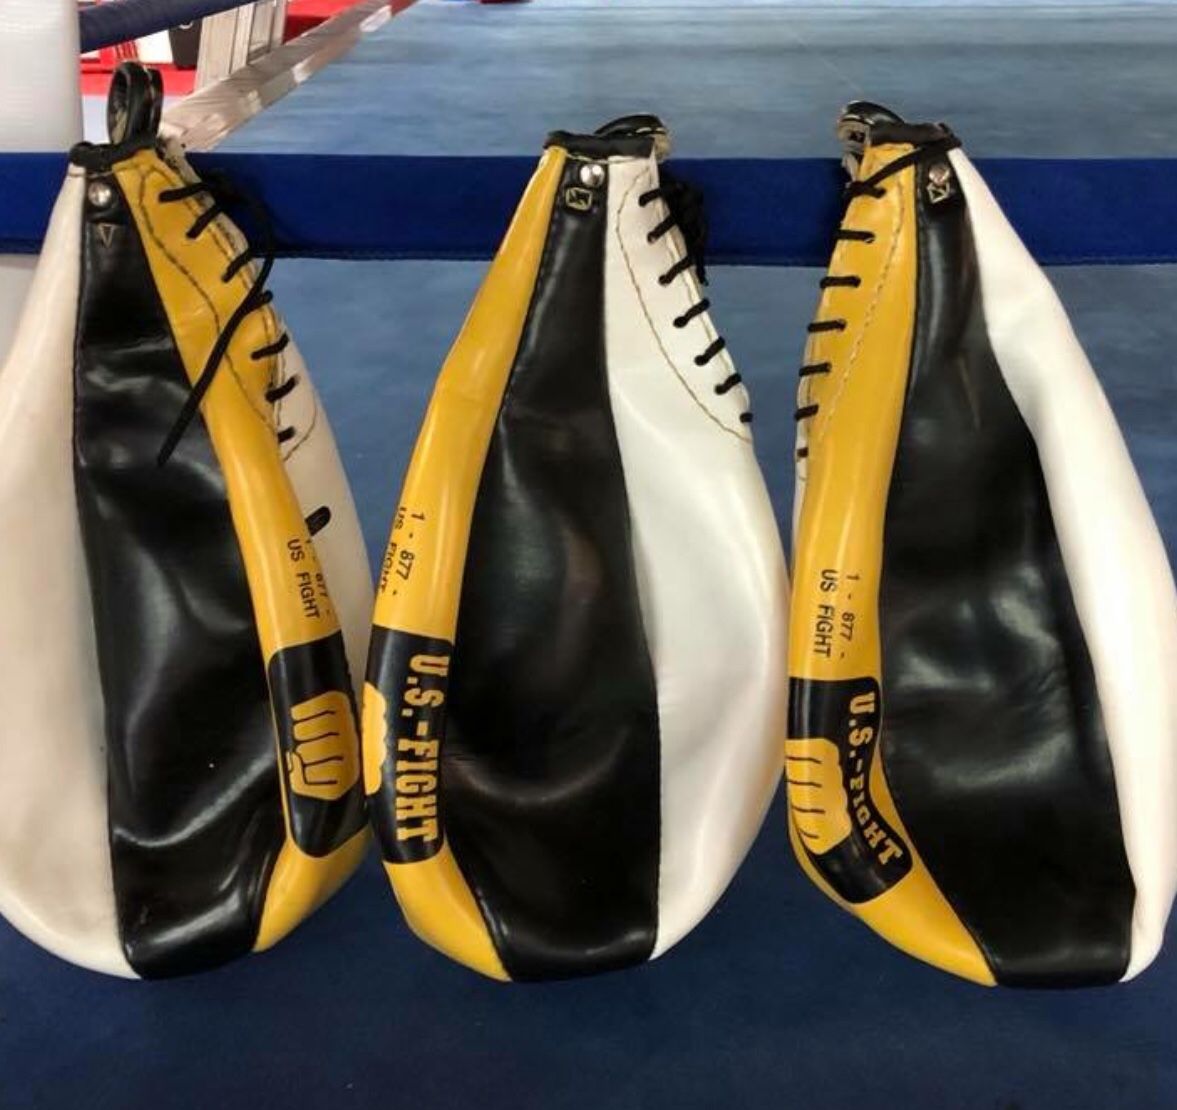 3 100% leather speed bag